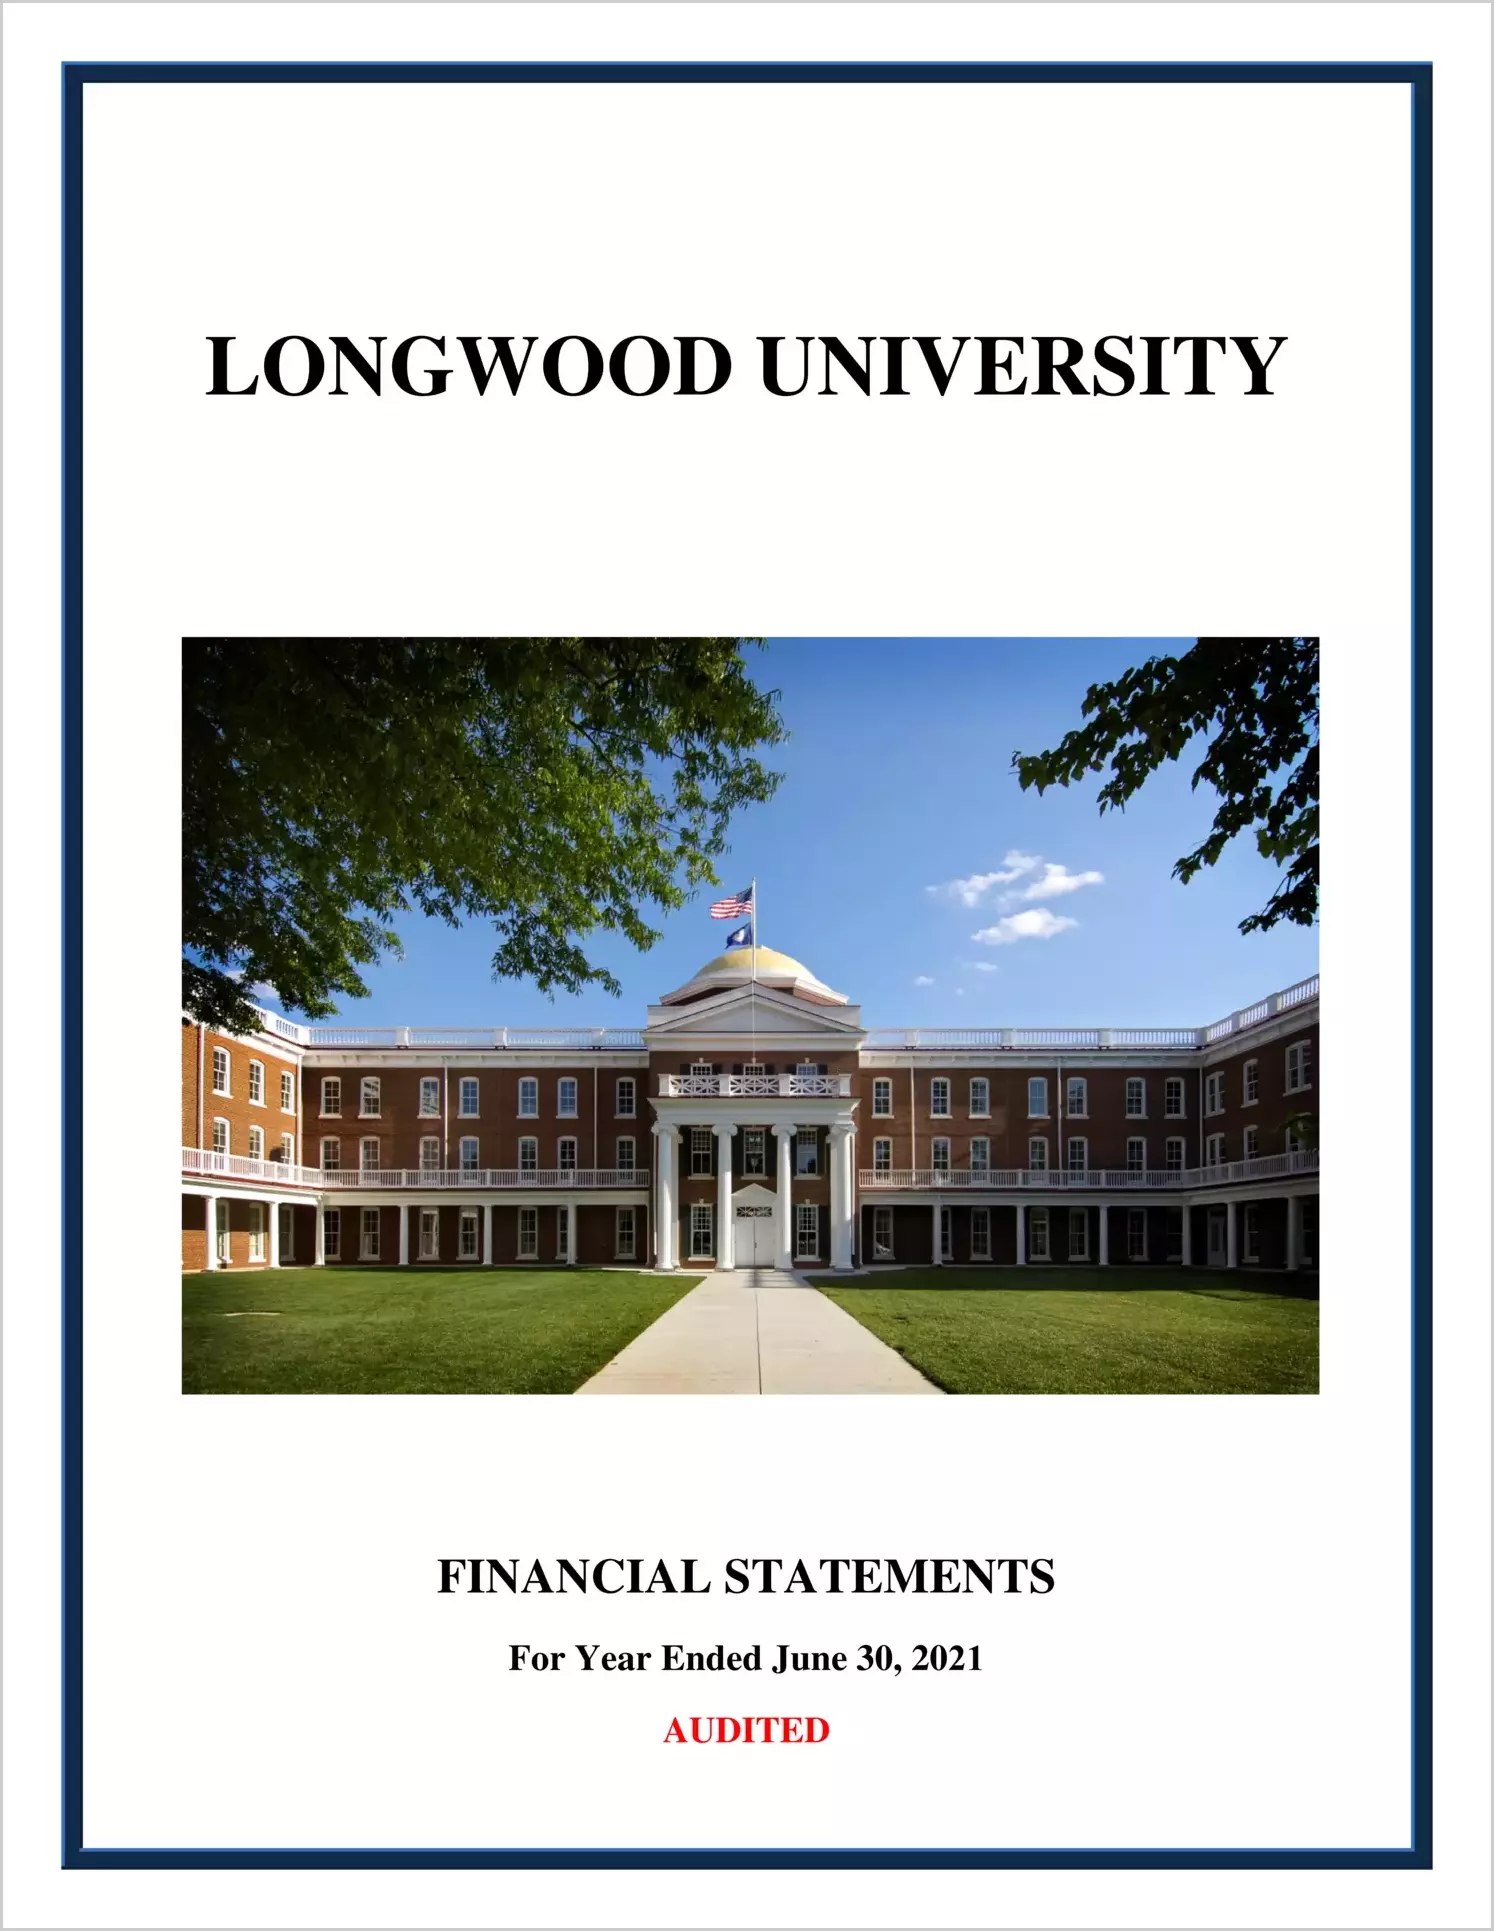 Longwood University Financial Statements for the year ended June 30, 2021